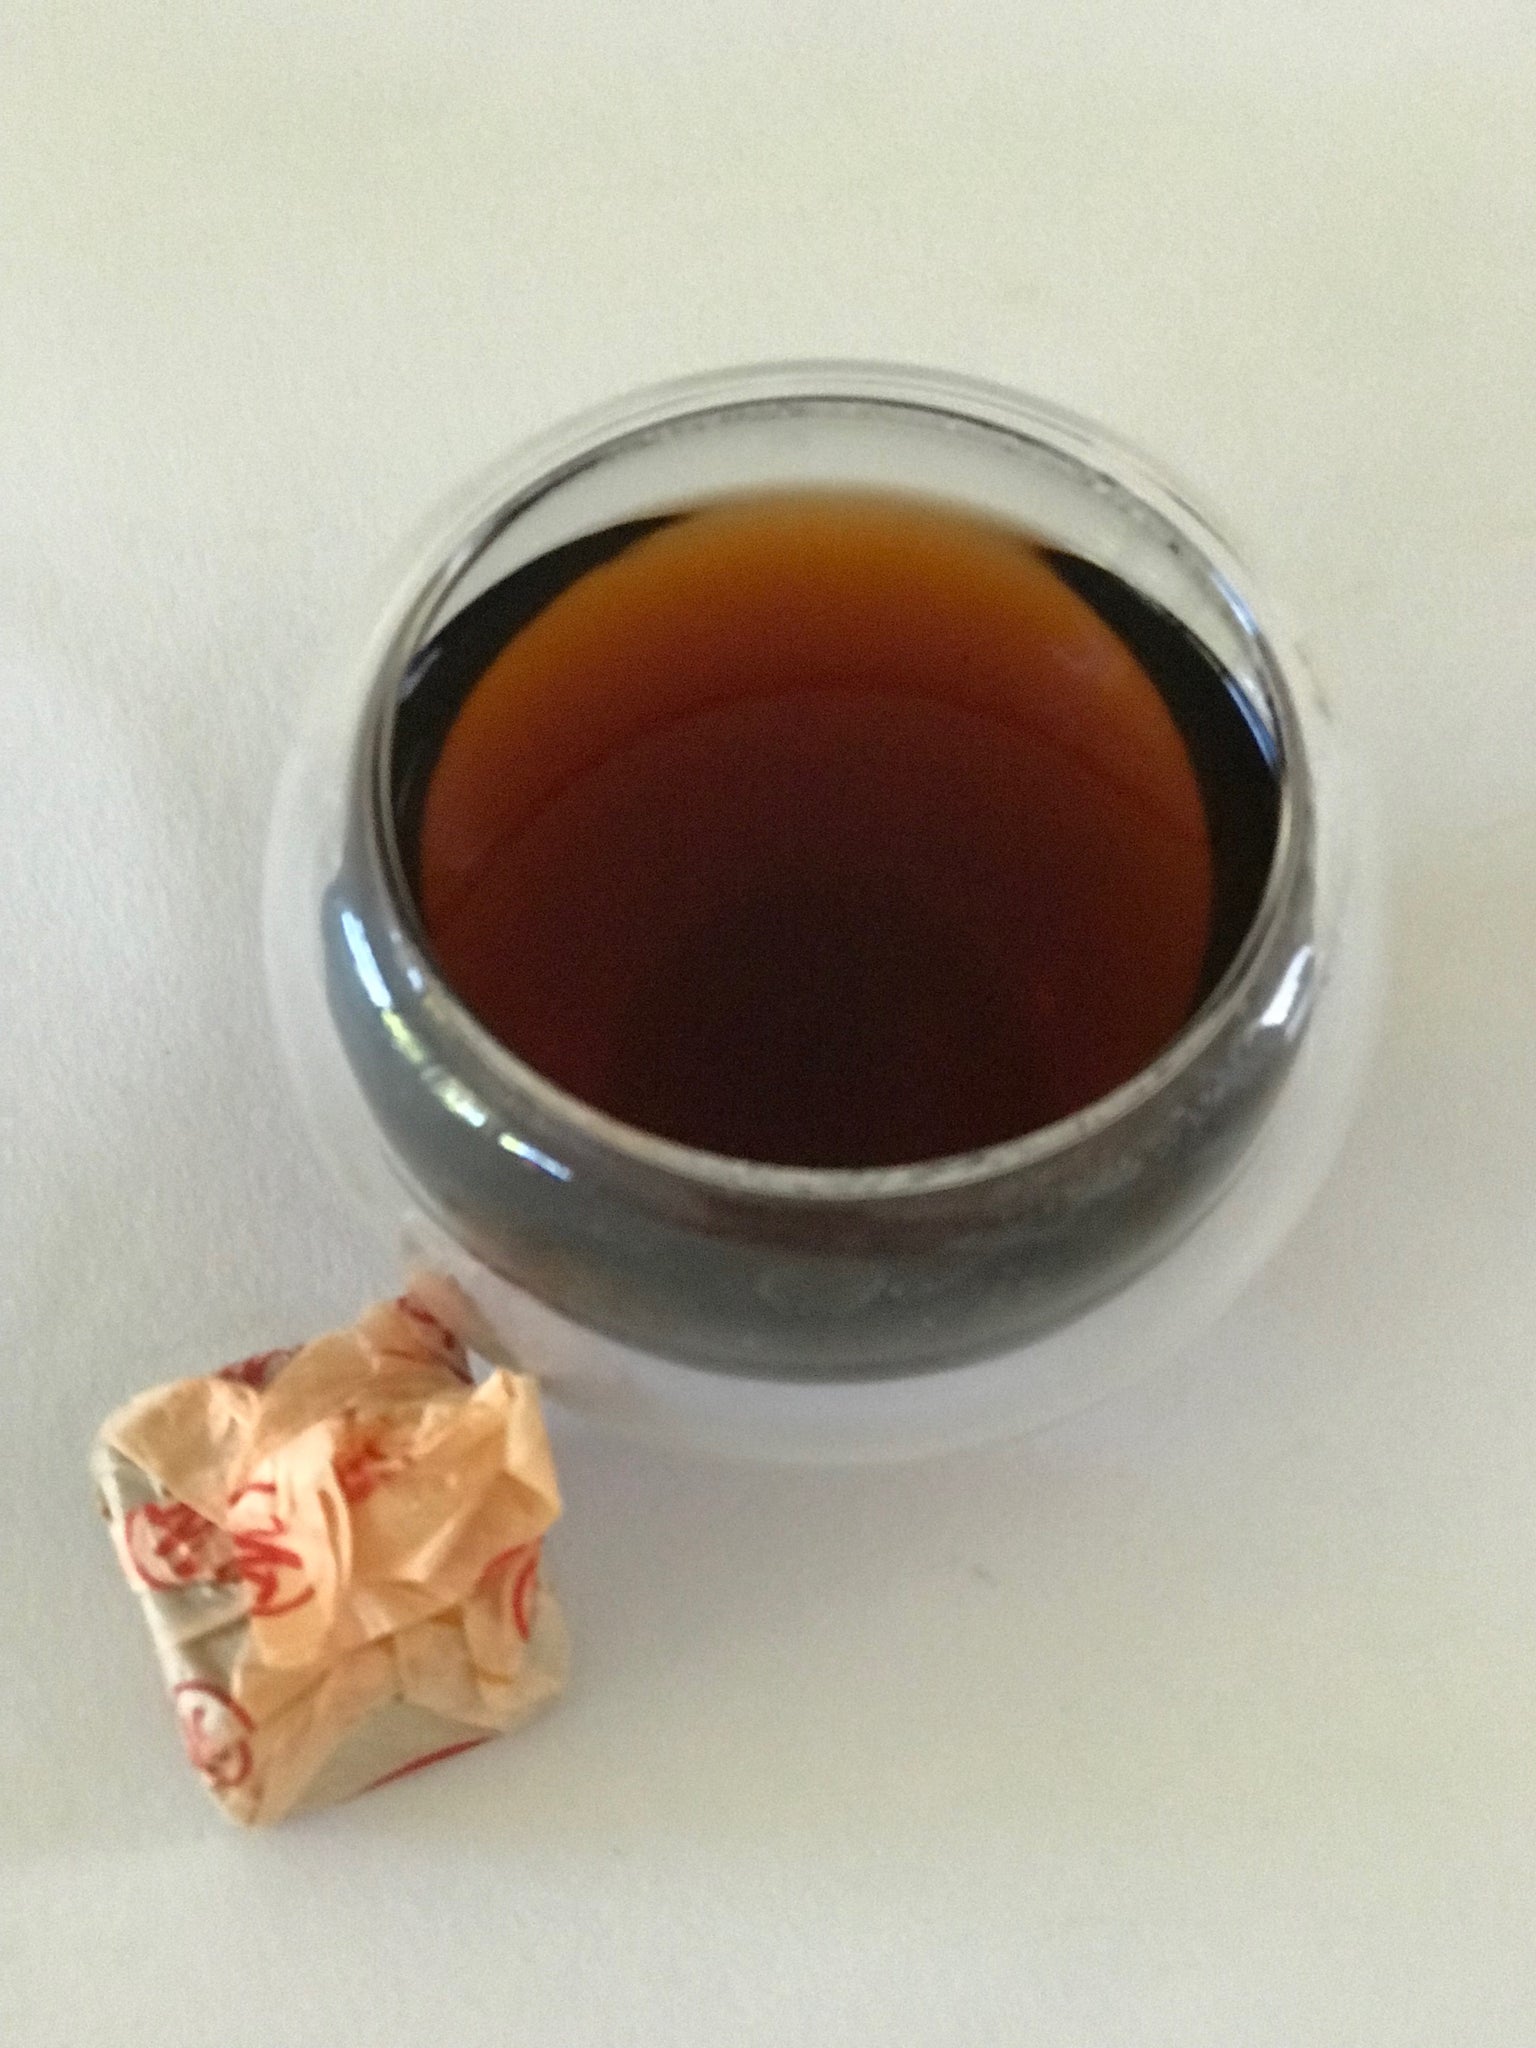 PU-ERH CUBE MINI-TUOCHA is a fully fermented Pu-erh tea with  a rich & mellow earthy taste. Just like fine wine , this tea develops & naturally improves with age.